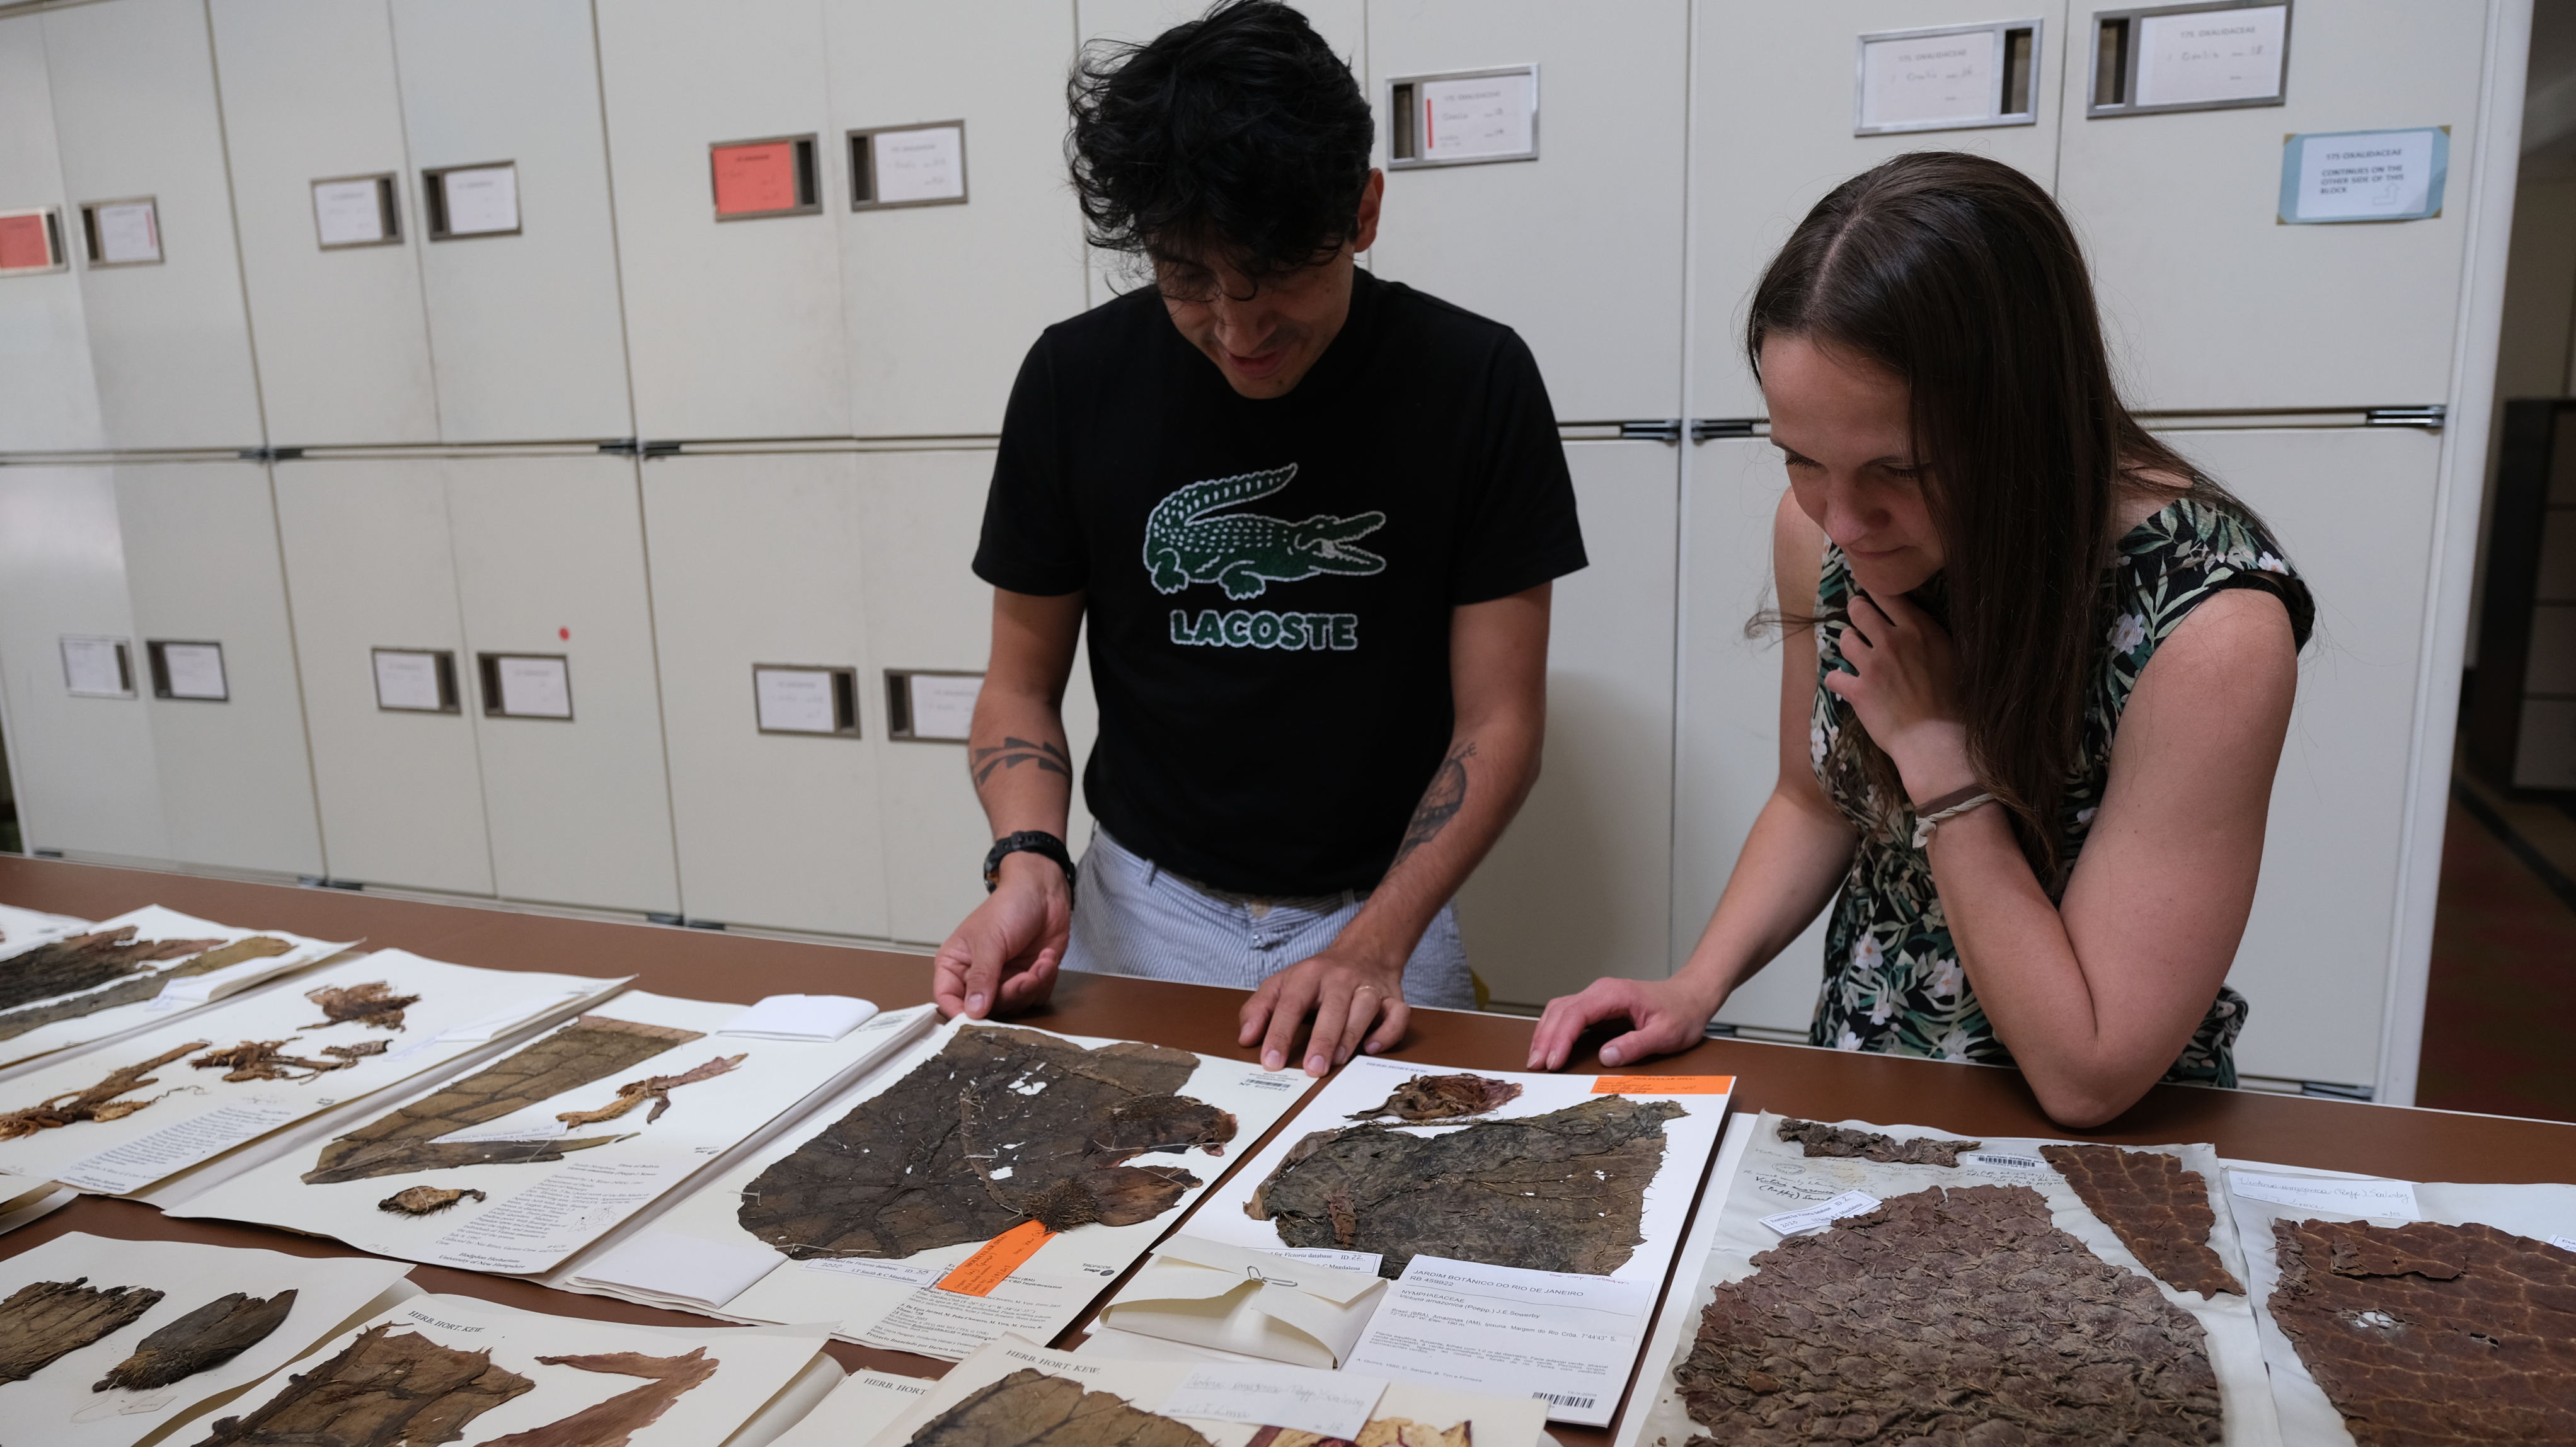 Two people inspecting dried plant specimens